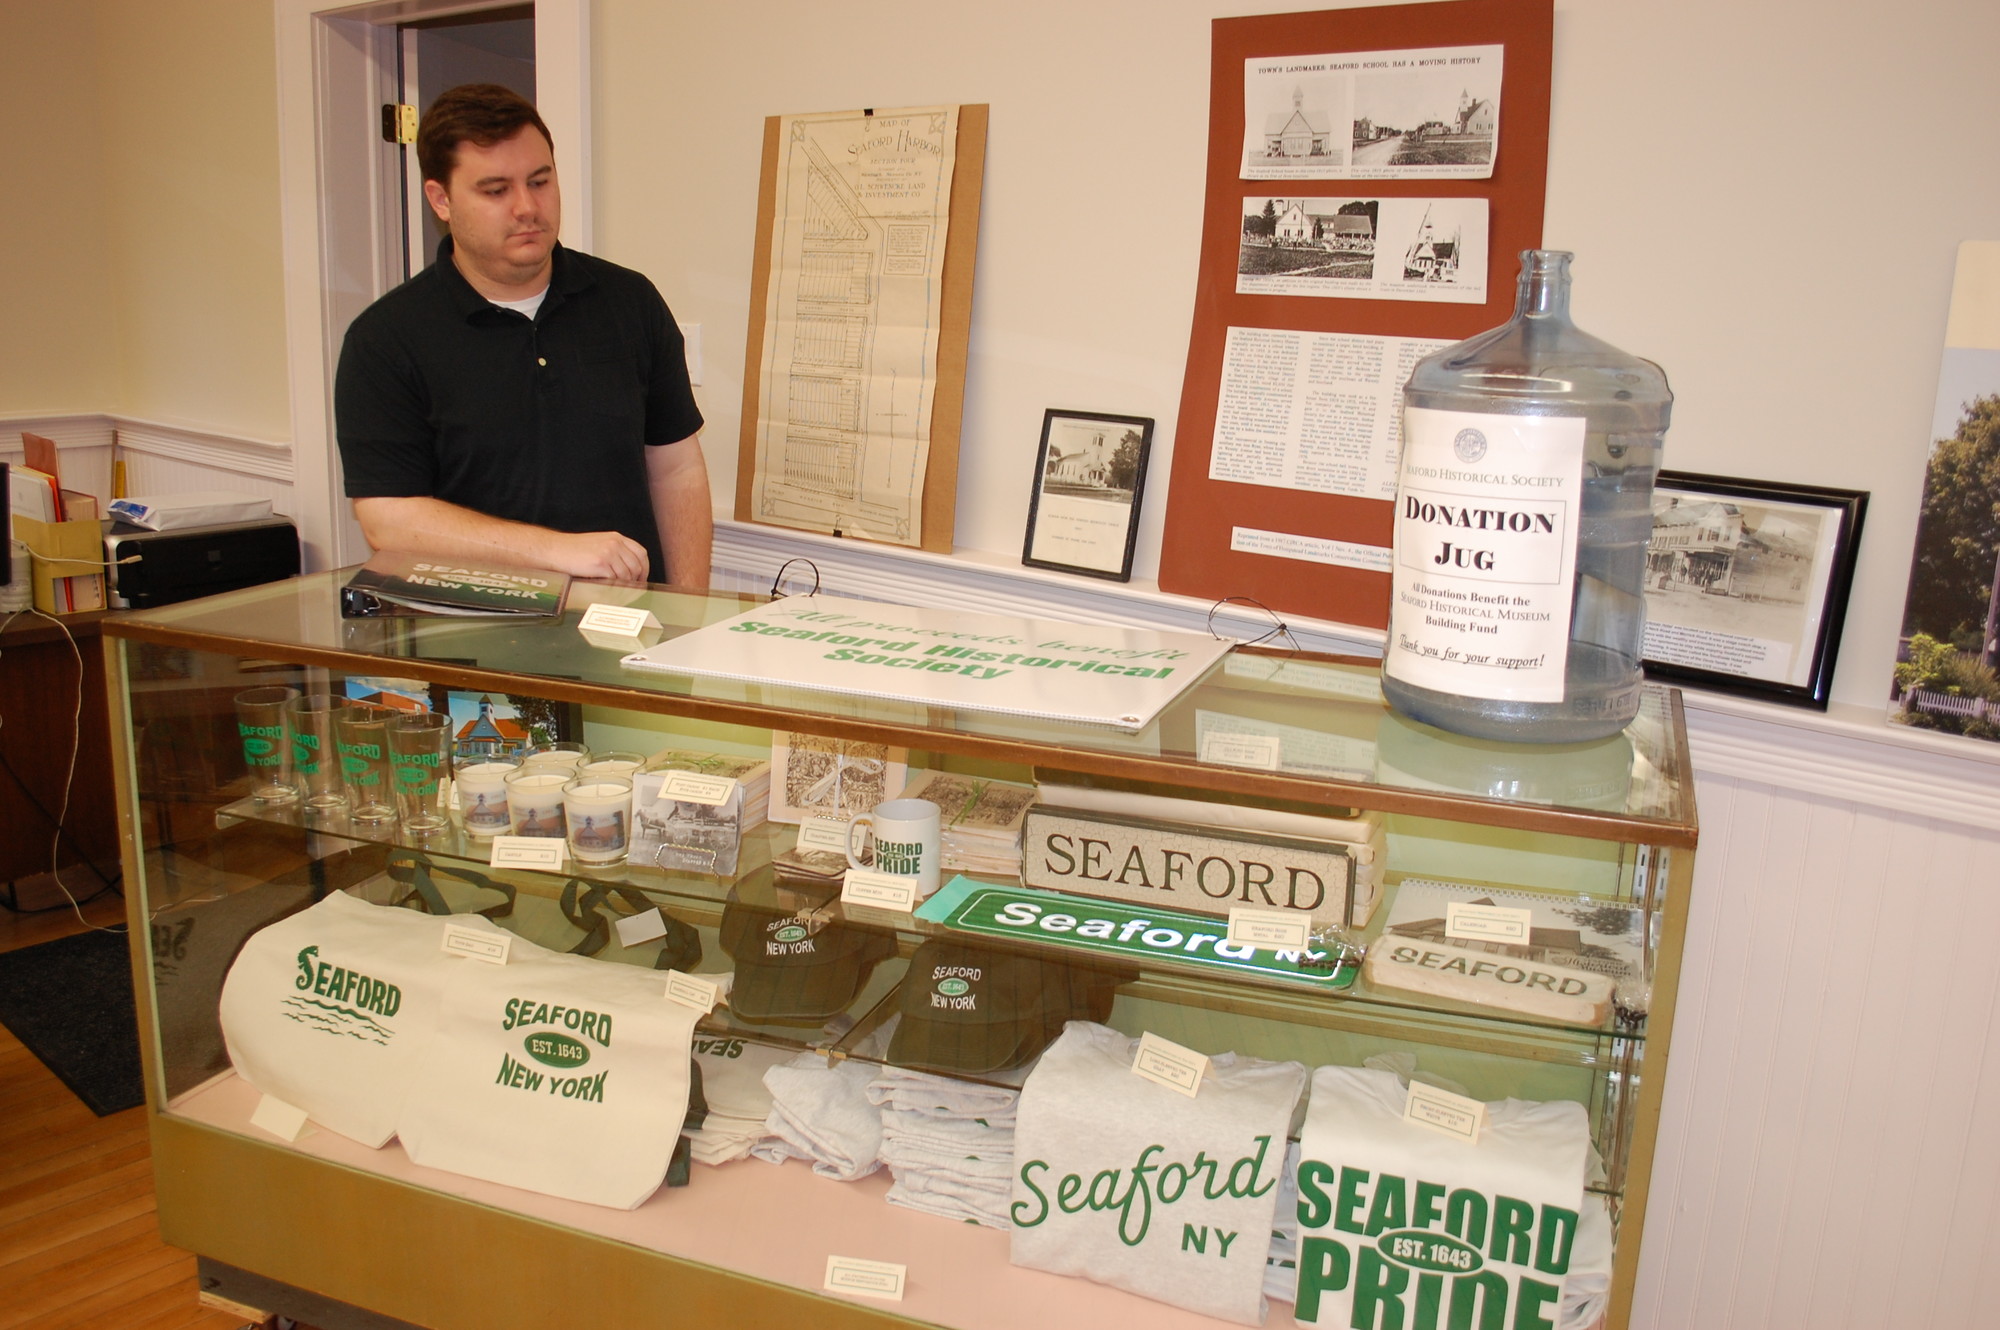 Patrick Martz designed Seaford merchandise for the Historical Society to sell to raise money for the all-volunteer organization.